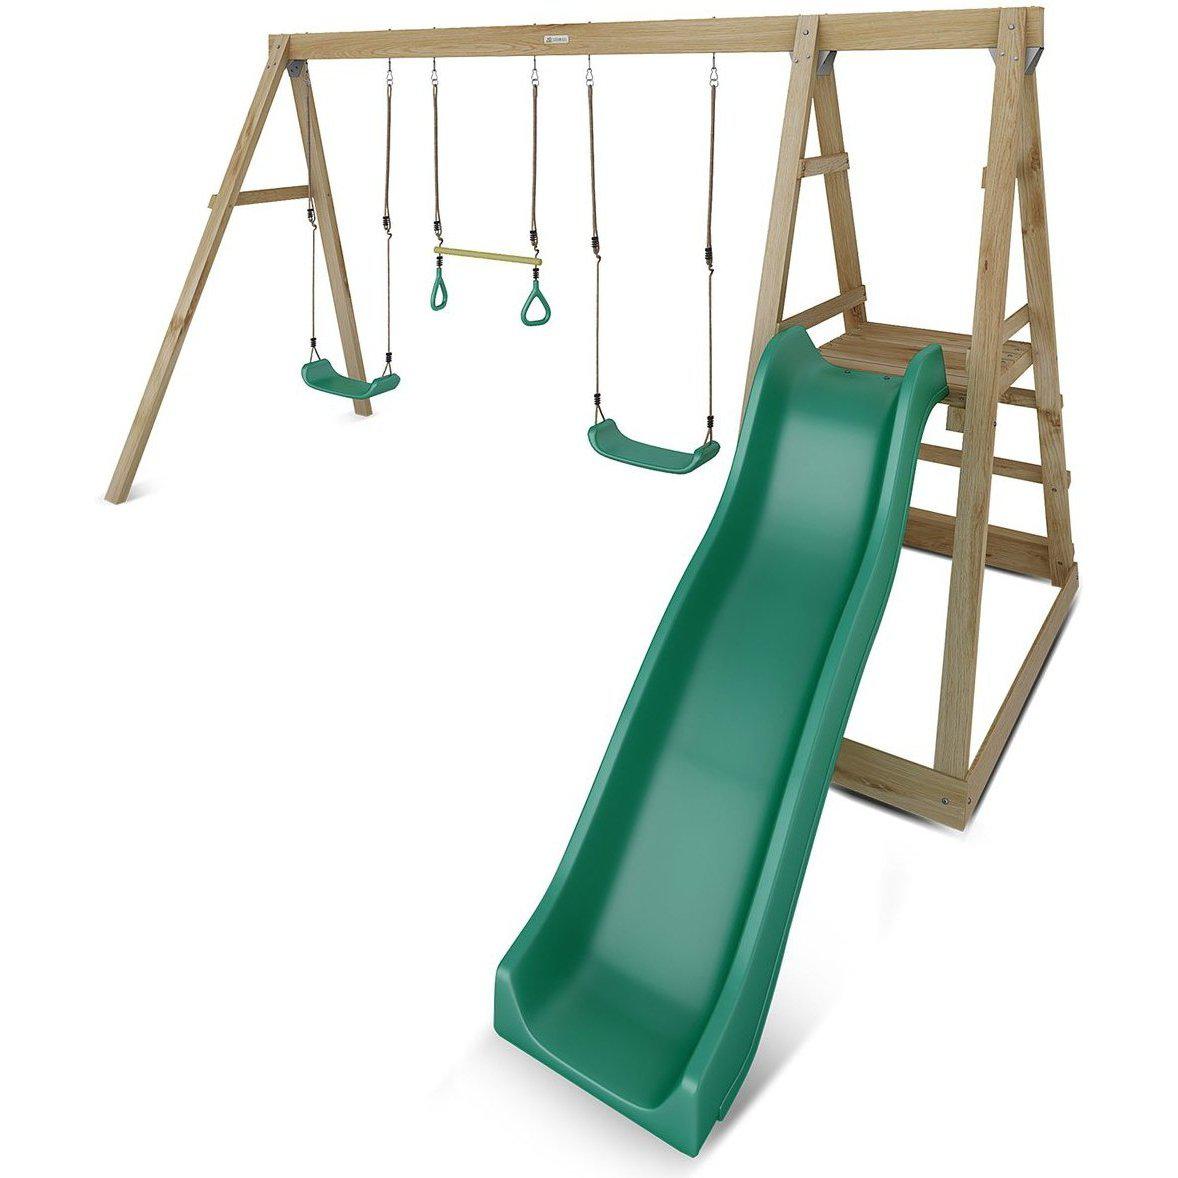 Buy Winston 4 Station Timber Swing Set with Slide Australia Delivery